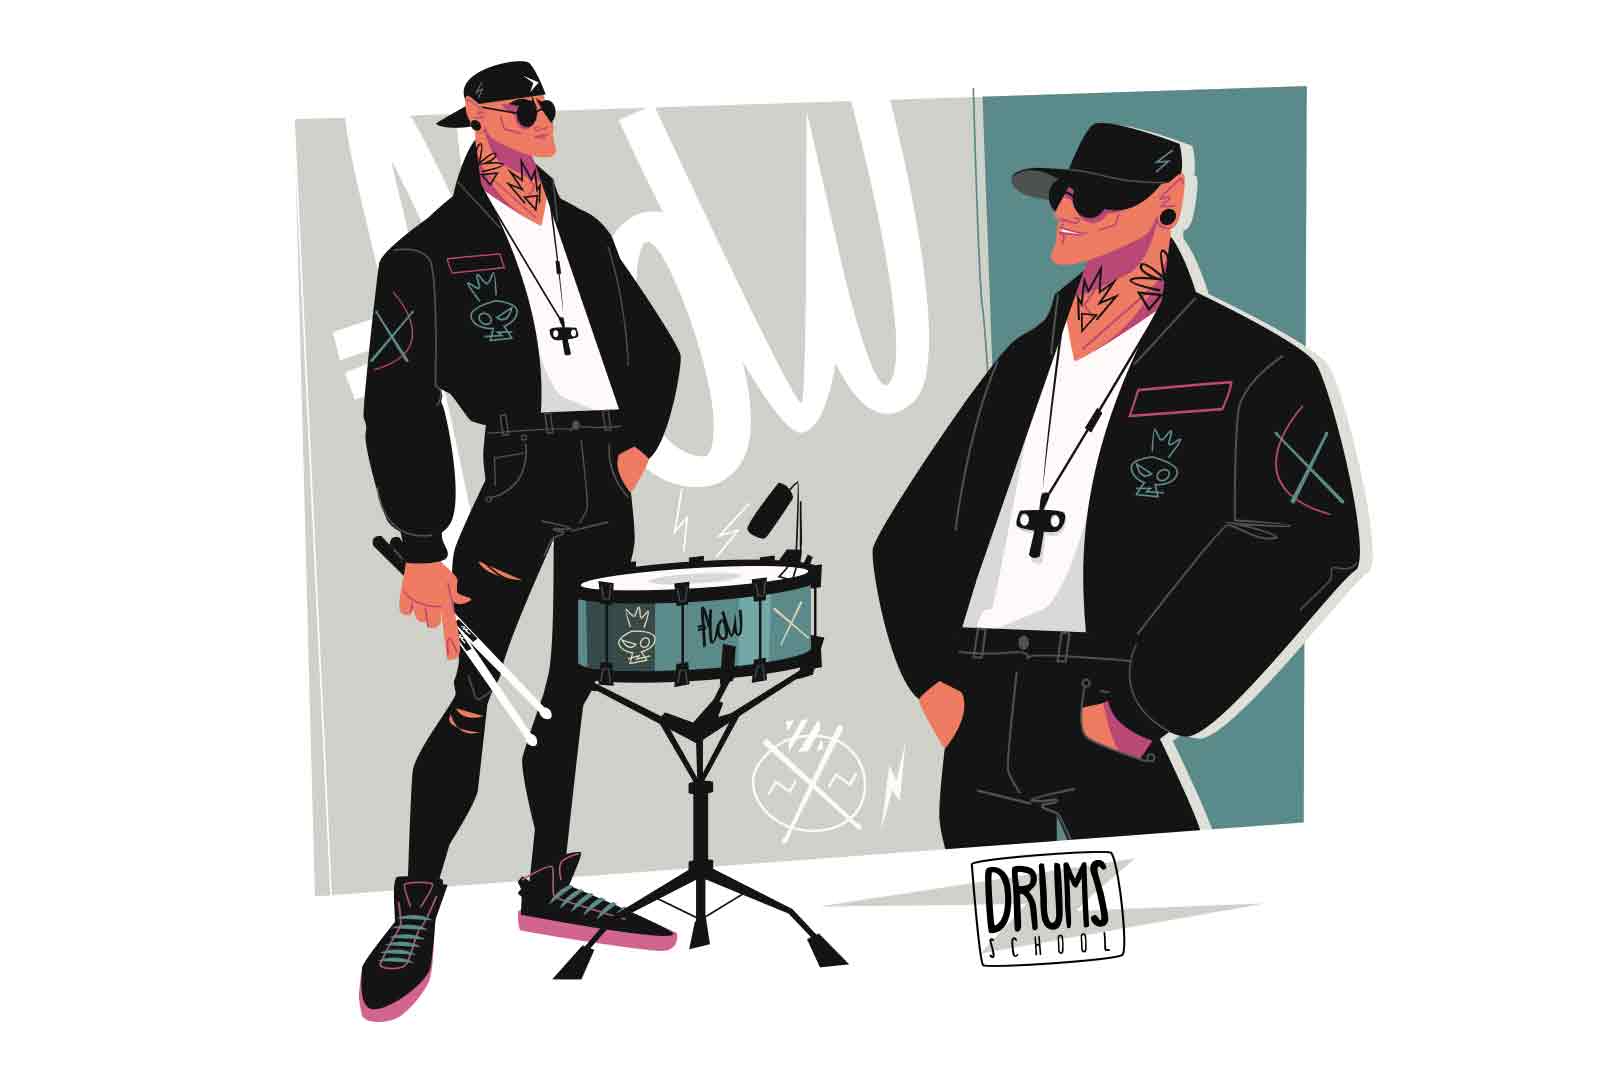 Brutal drummer man playing with sticks on drums vector illustration. Member of rock group. Musical show. Drums school and musical art concept